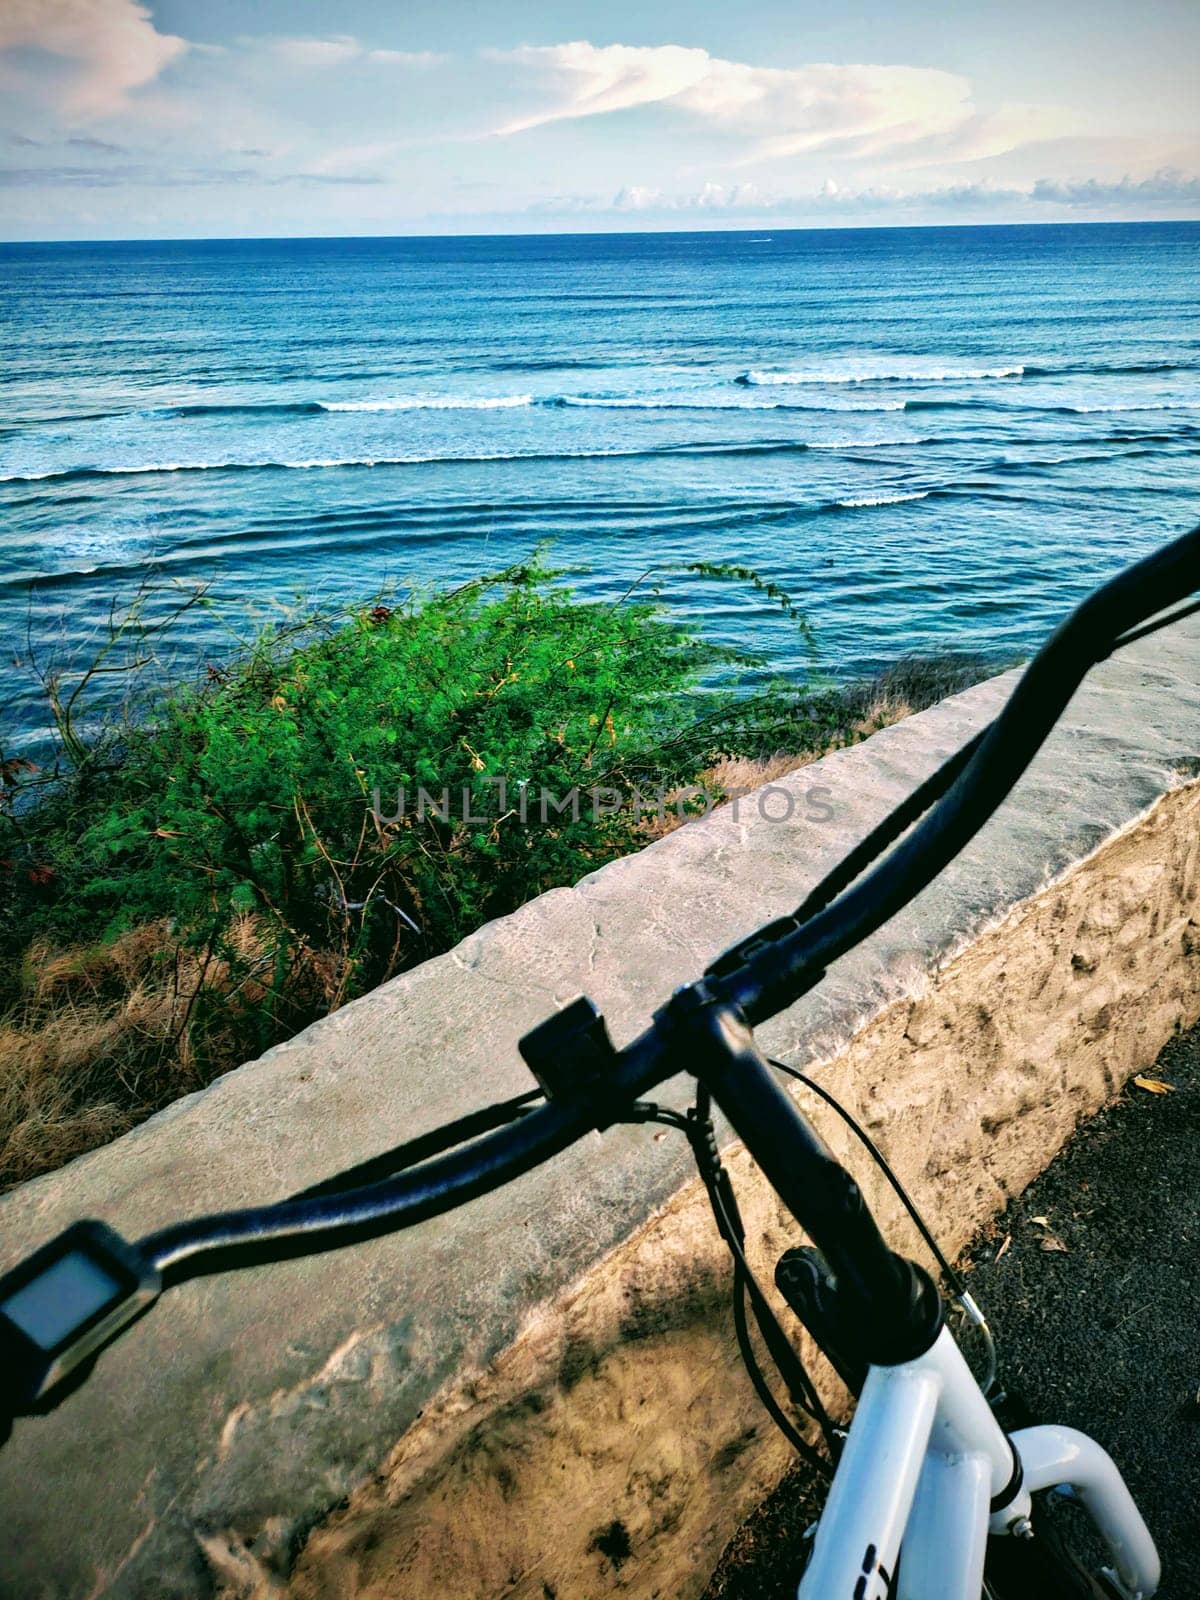 Ebike at Diamond Head Lookout by EricGBVD